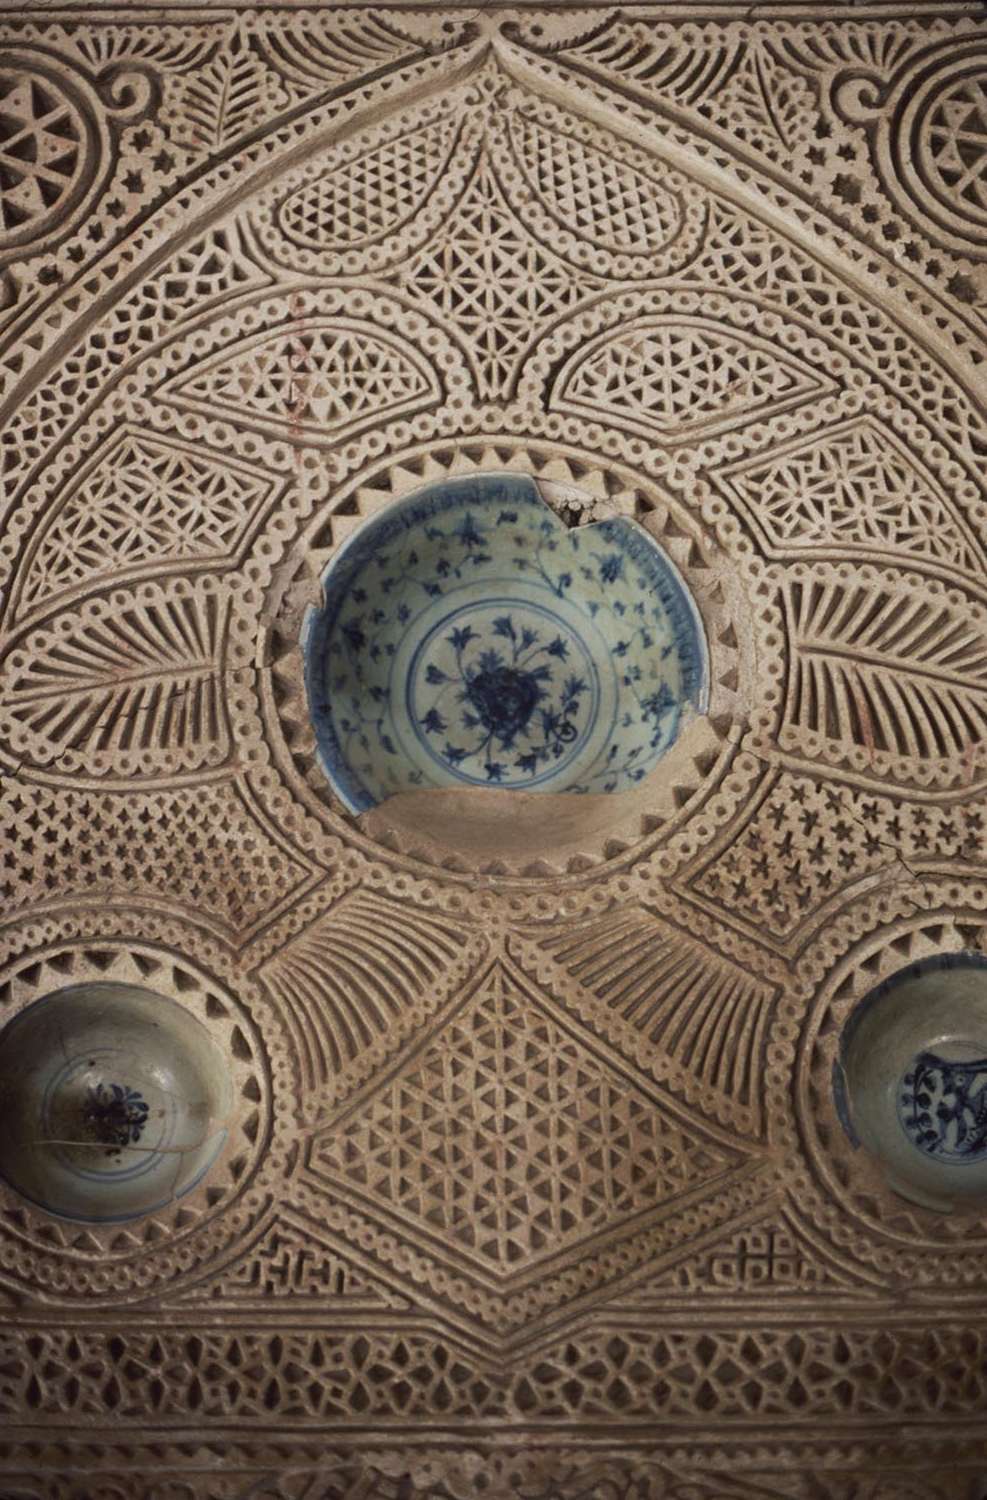 Detail of mihrab showing inset ceramic blue-on-white bowls.